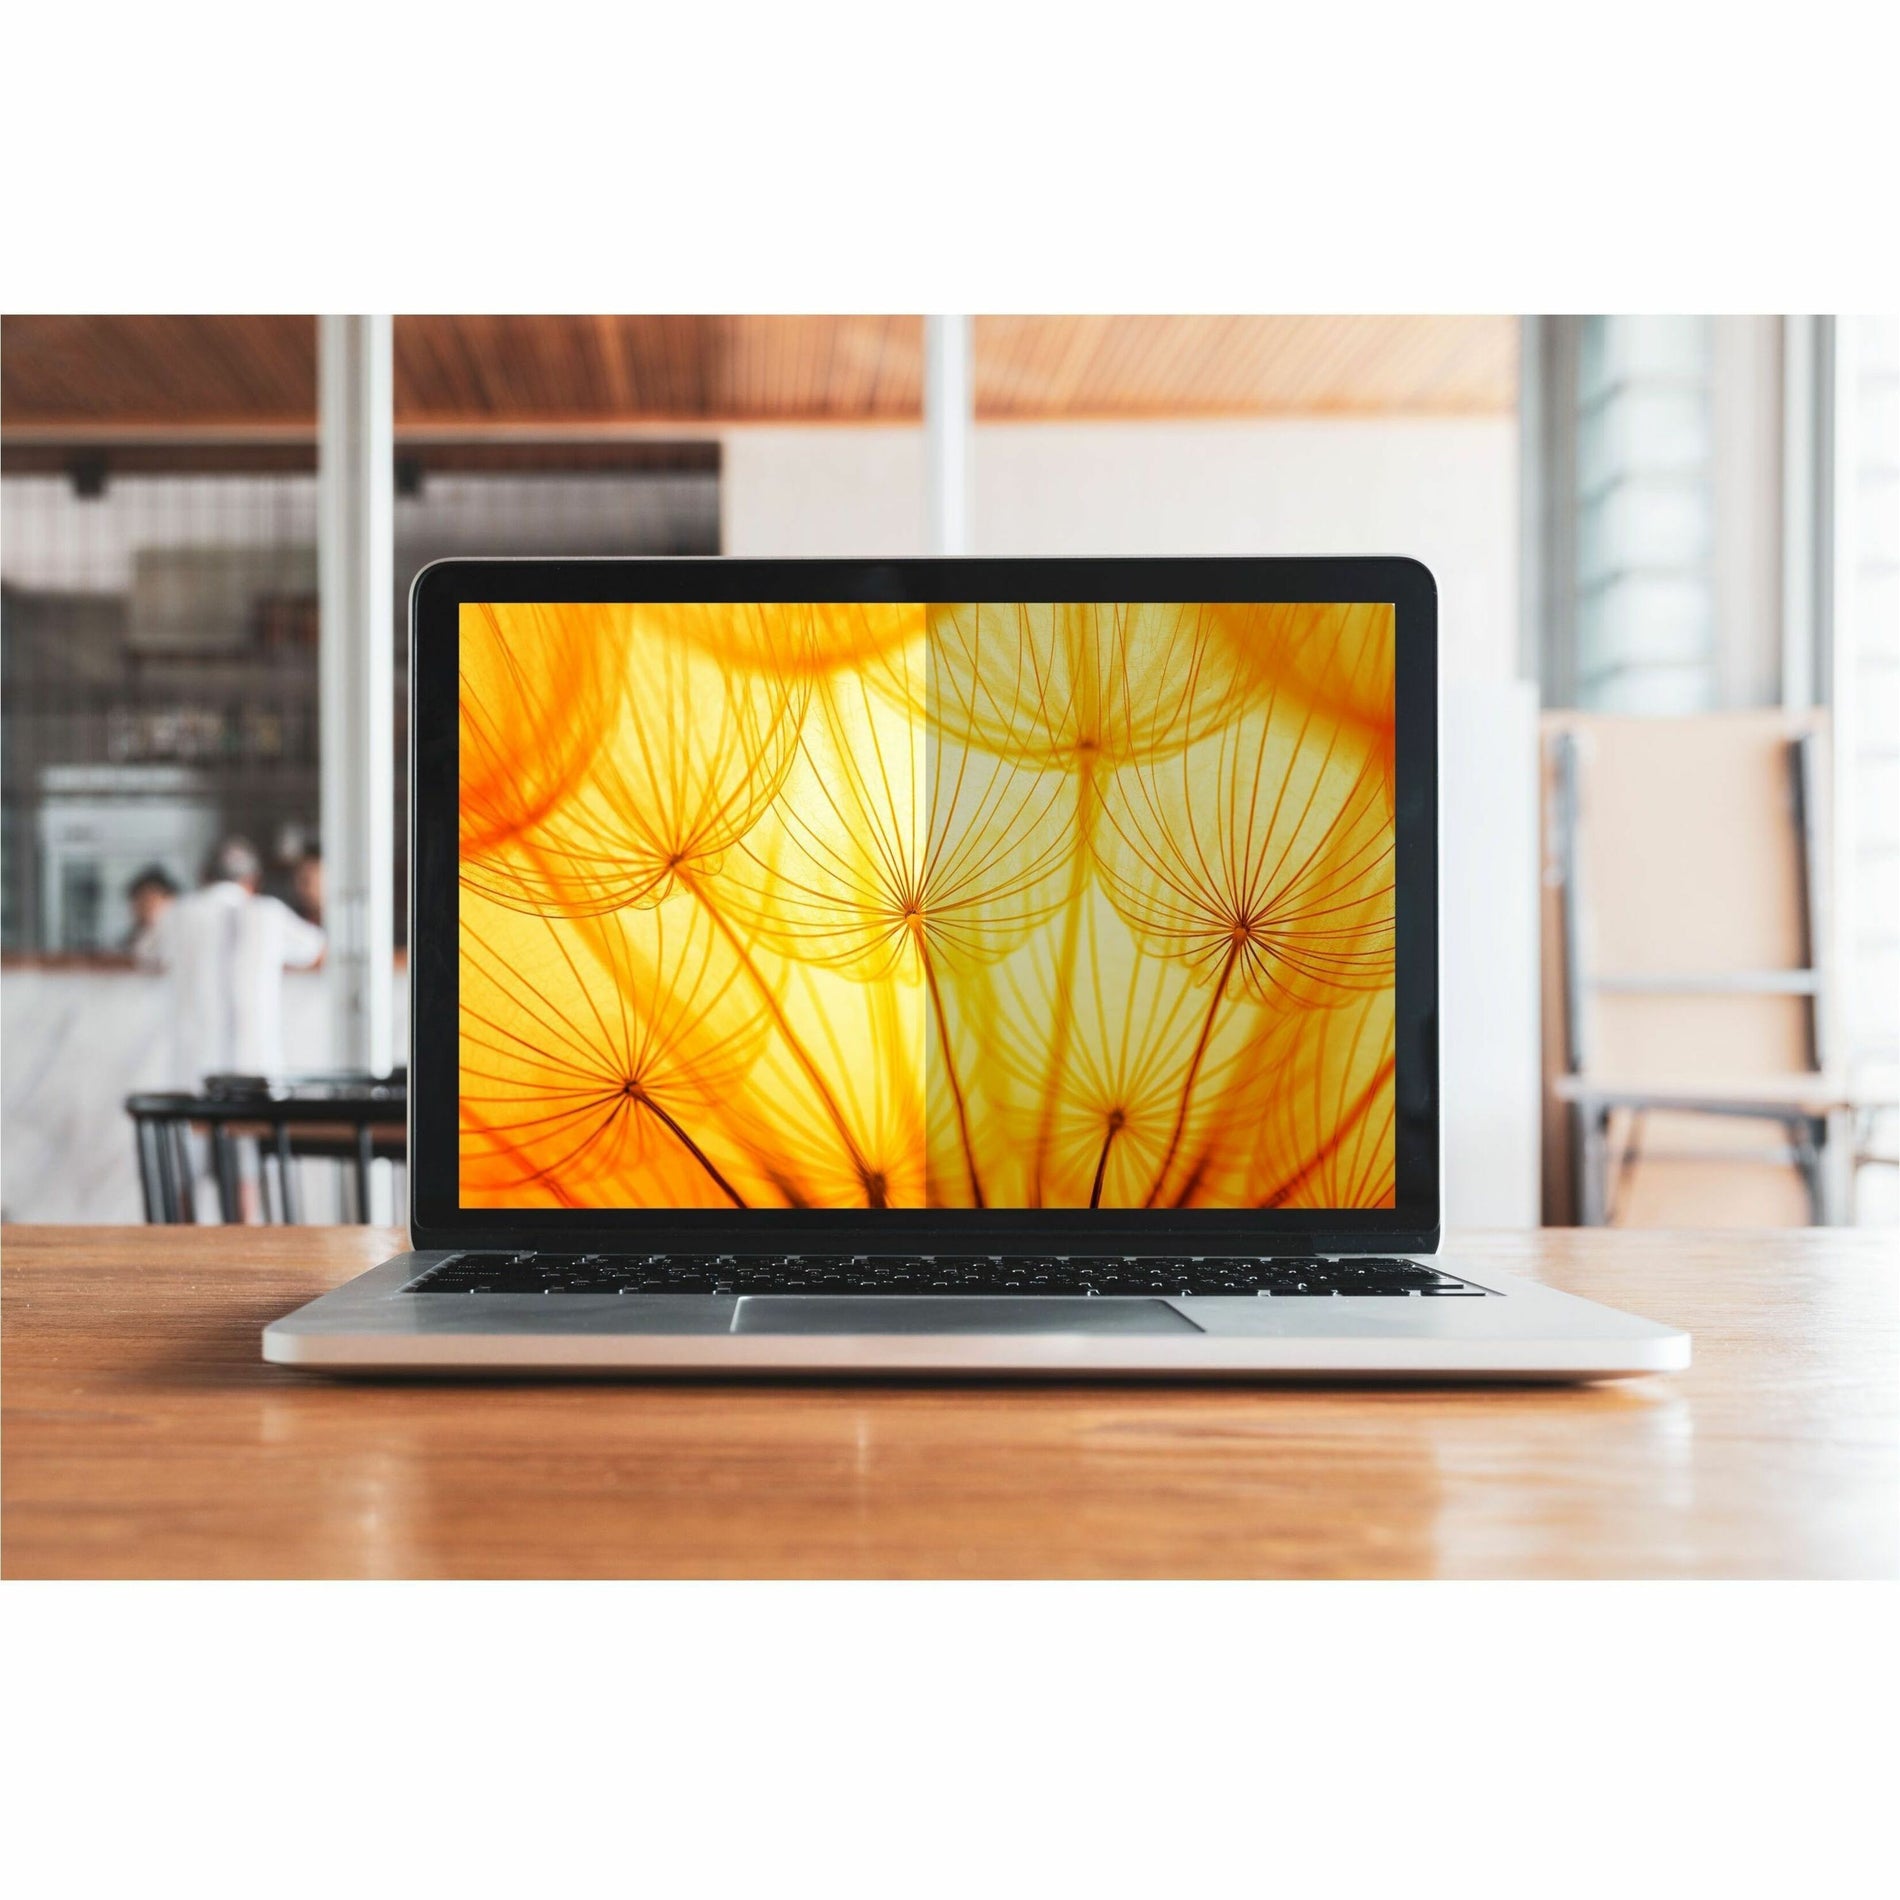 3M BP133W9E Bright Screen Privacy Filter for 13.3in Full Screen Laptop, 16:9, Ultra Slim, Blue Light Reduction